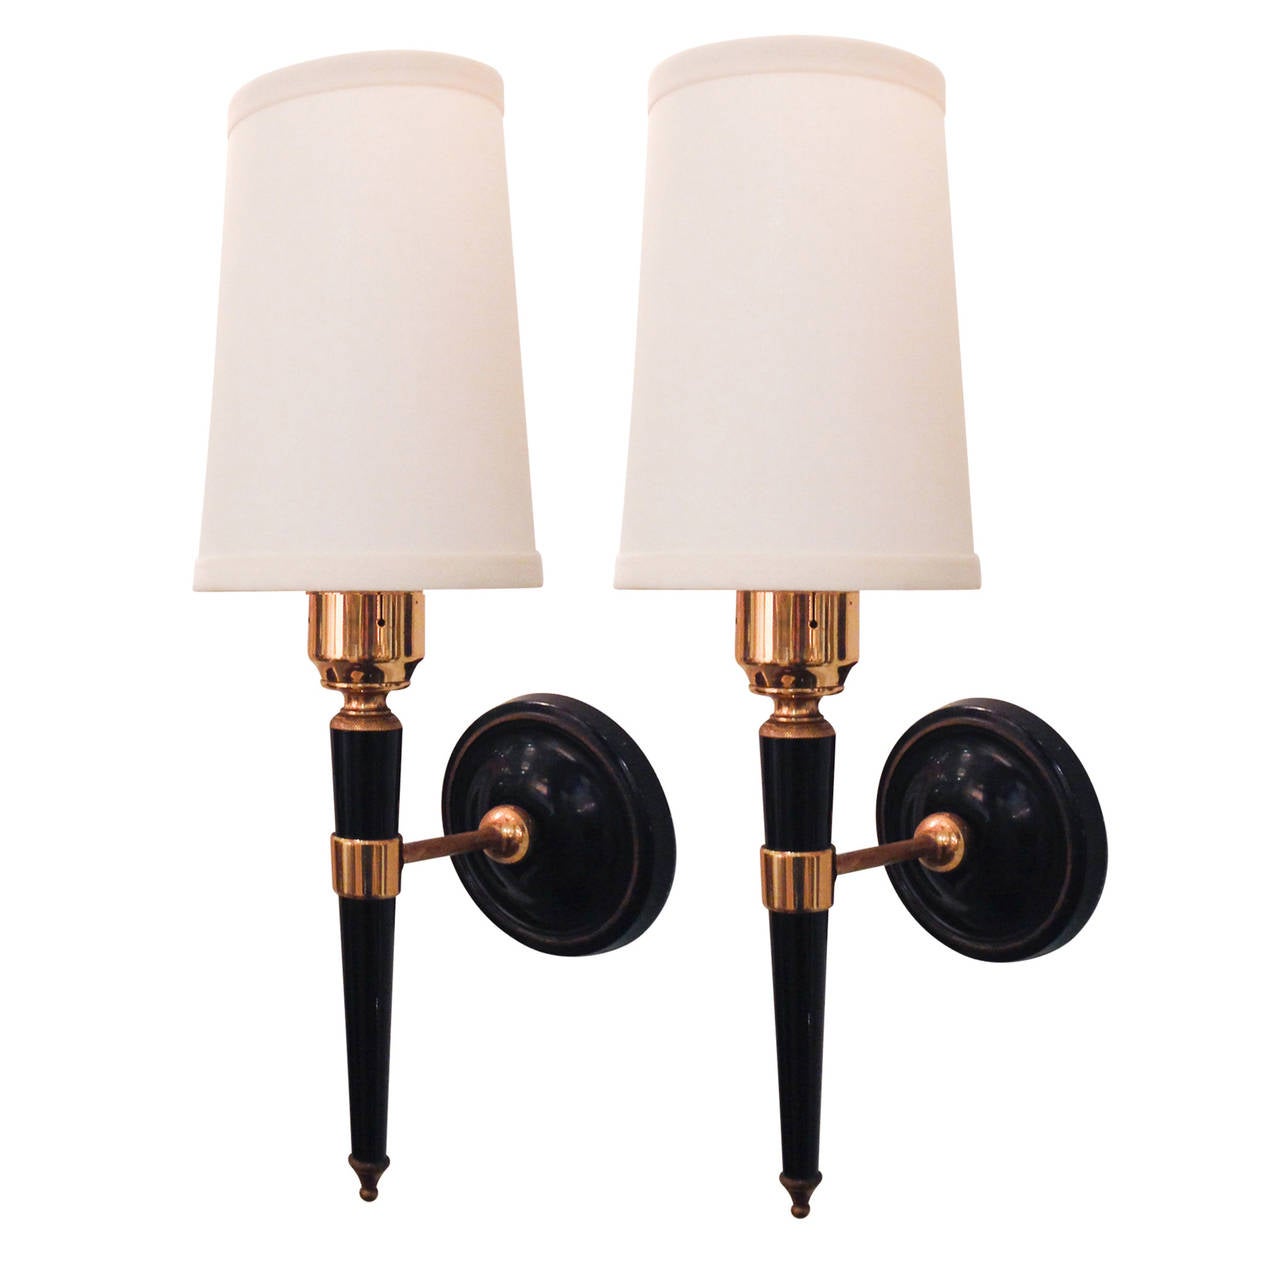 Mid-20th Century Pair of Black and Brass Post Sconces